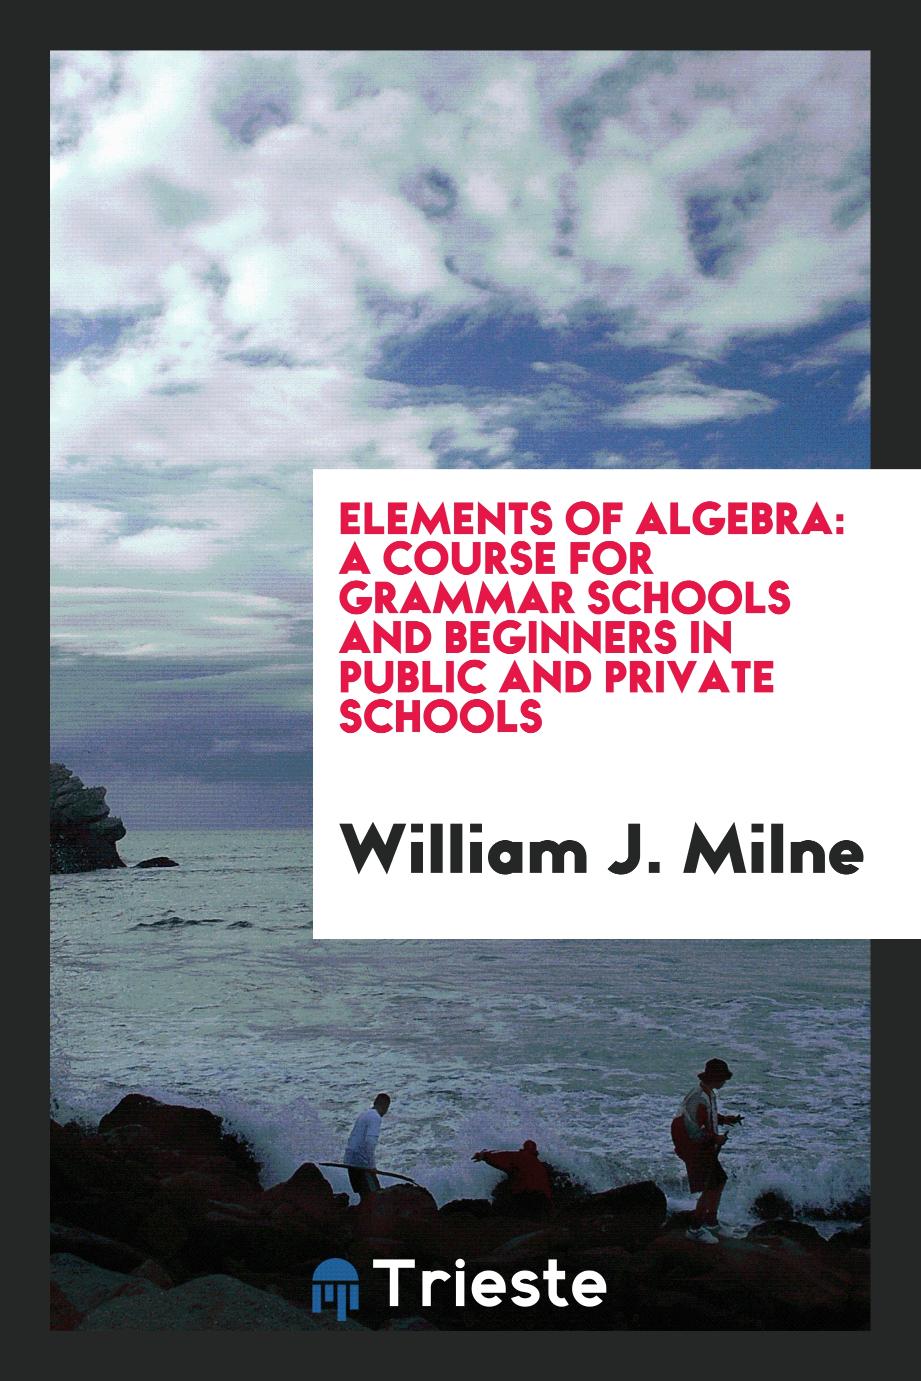 Elements of algebra: a course for grammar schools and beginners in public and private schools